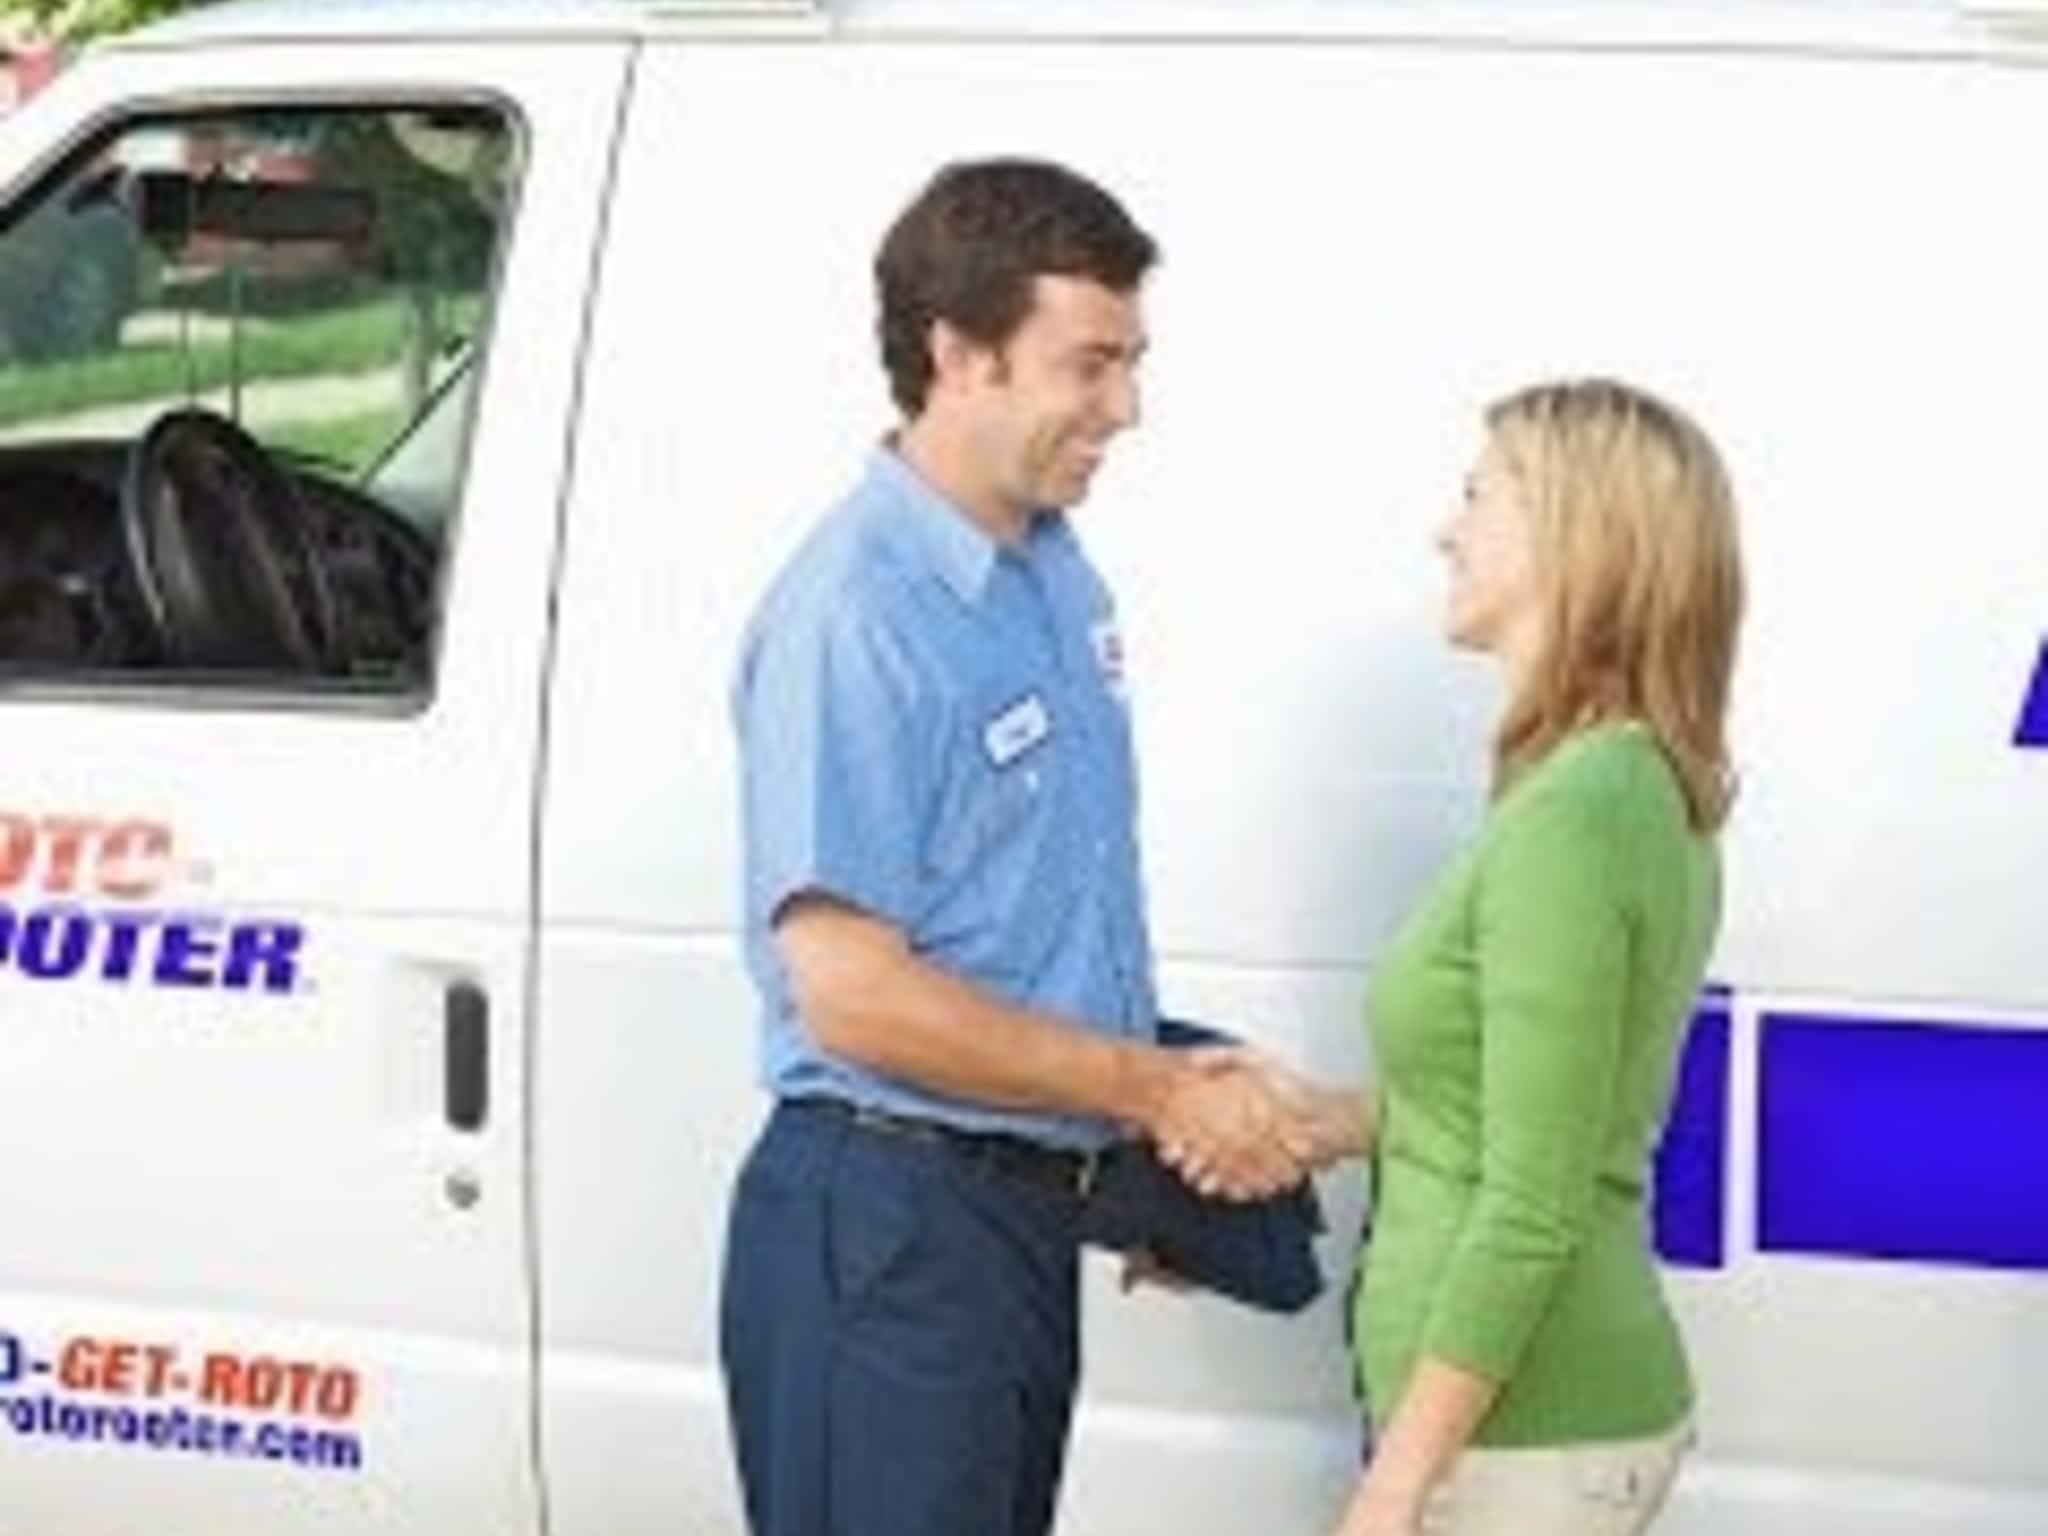 photo Roto-Rooter Plumbing & Drain Services